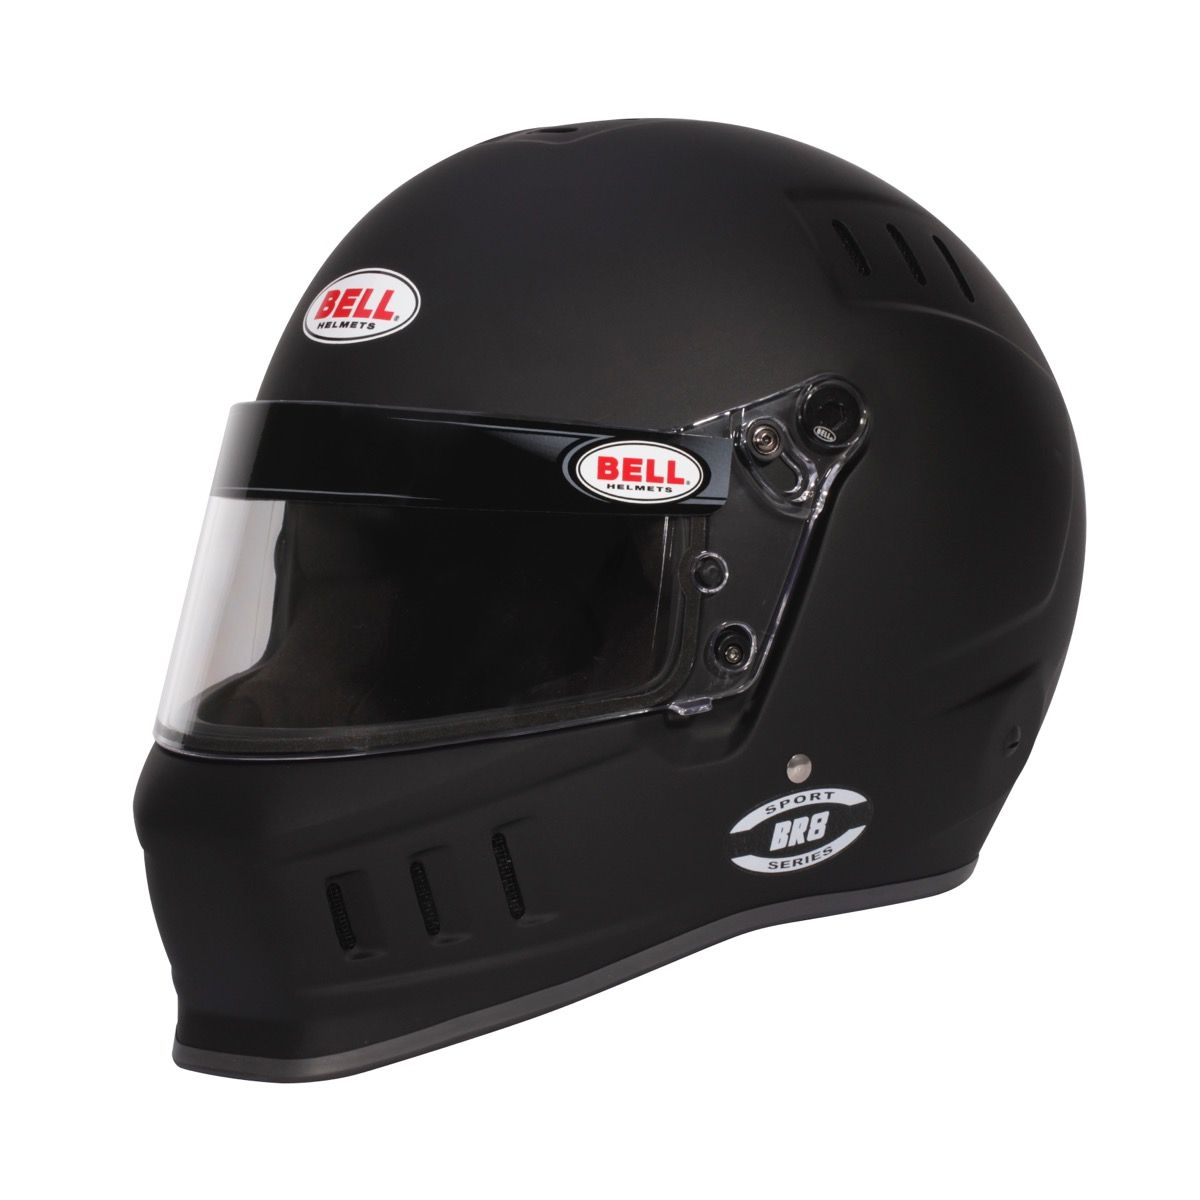 "Bell BR8 Helmet BLACK SA2020 Front View Image